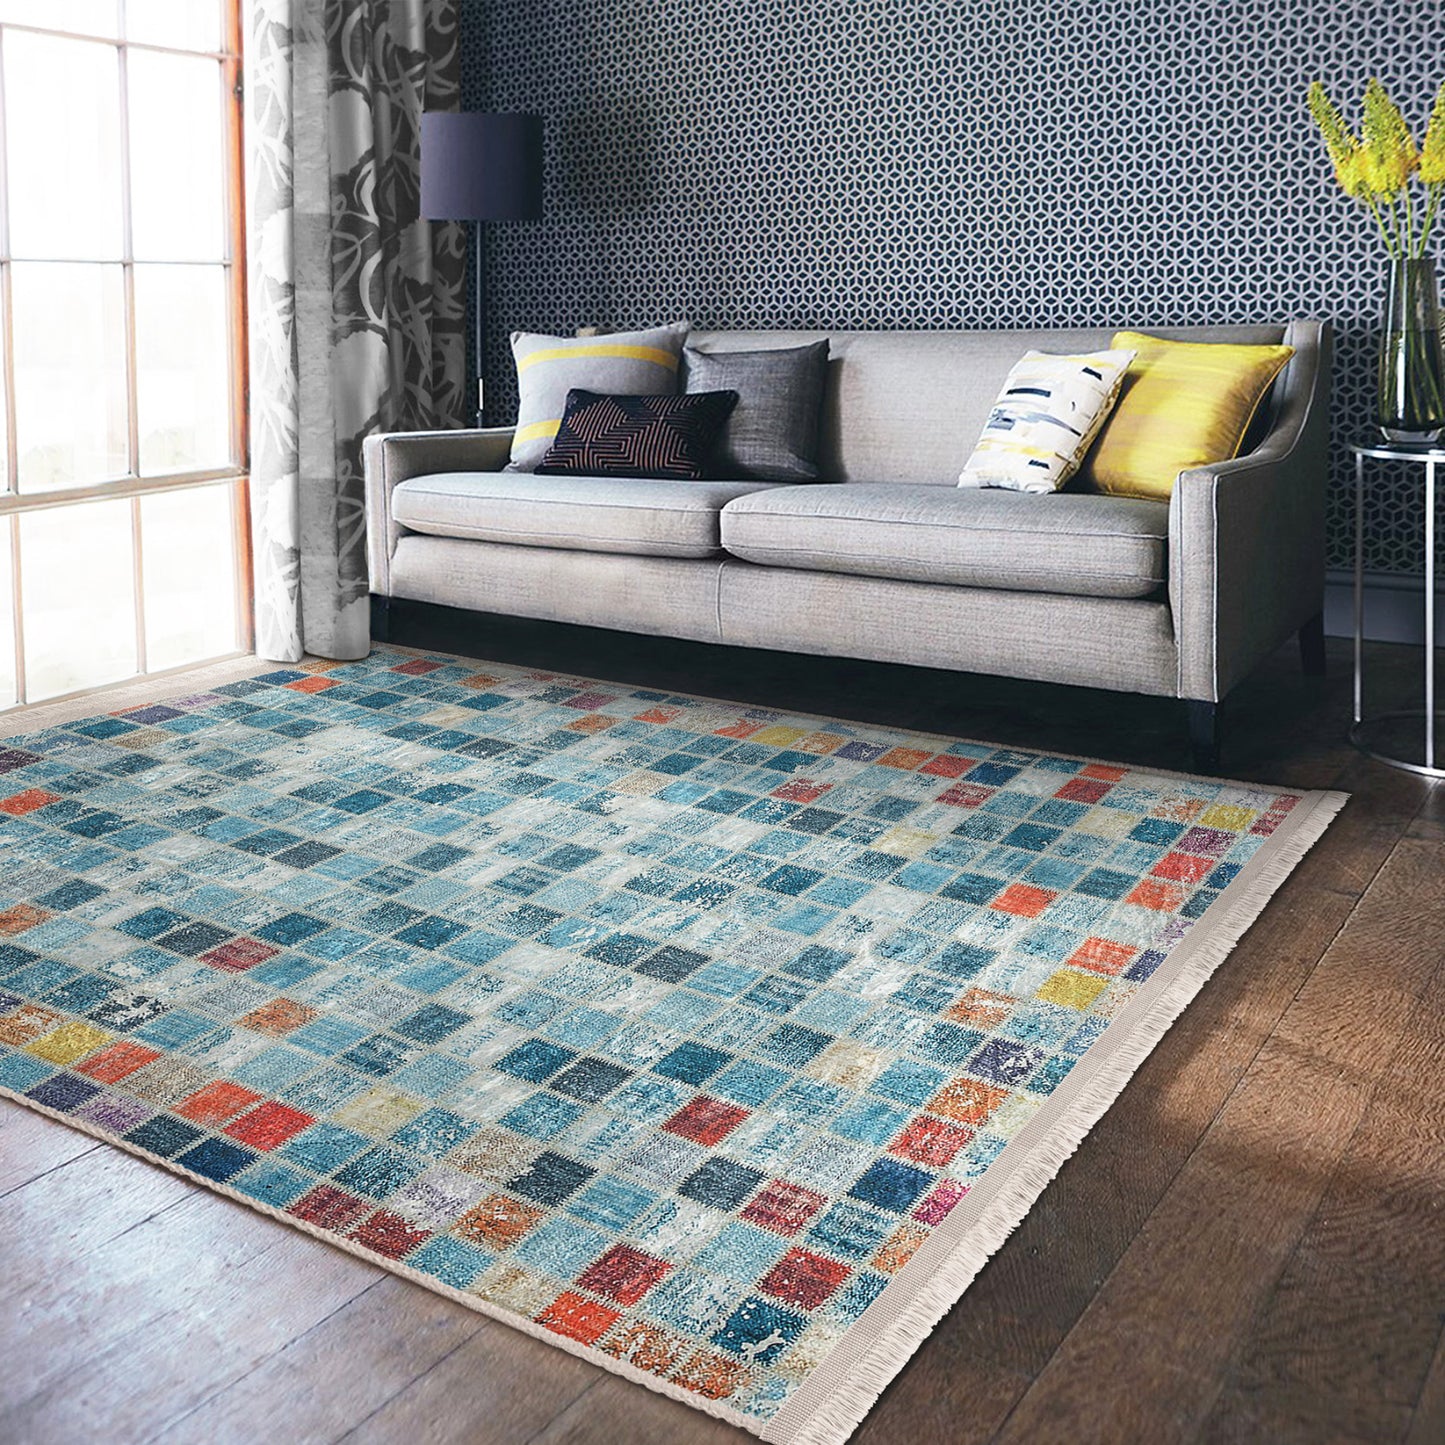 Vintage-inspired Farmhouse Rug with Checkered Design